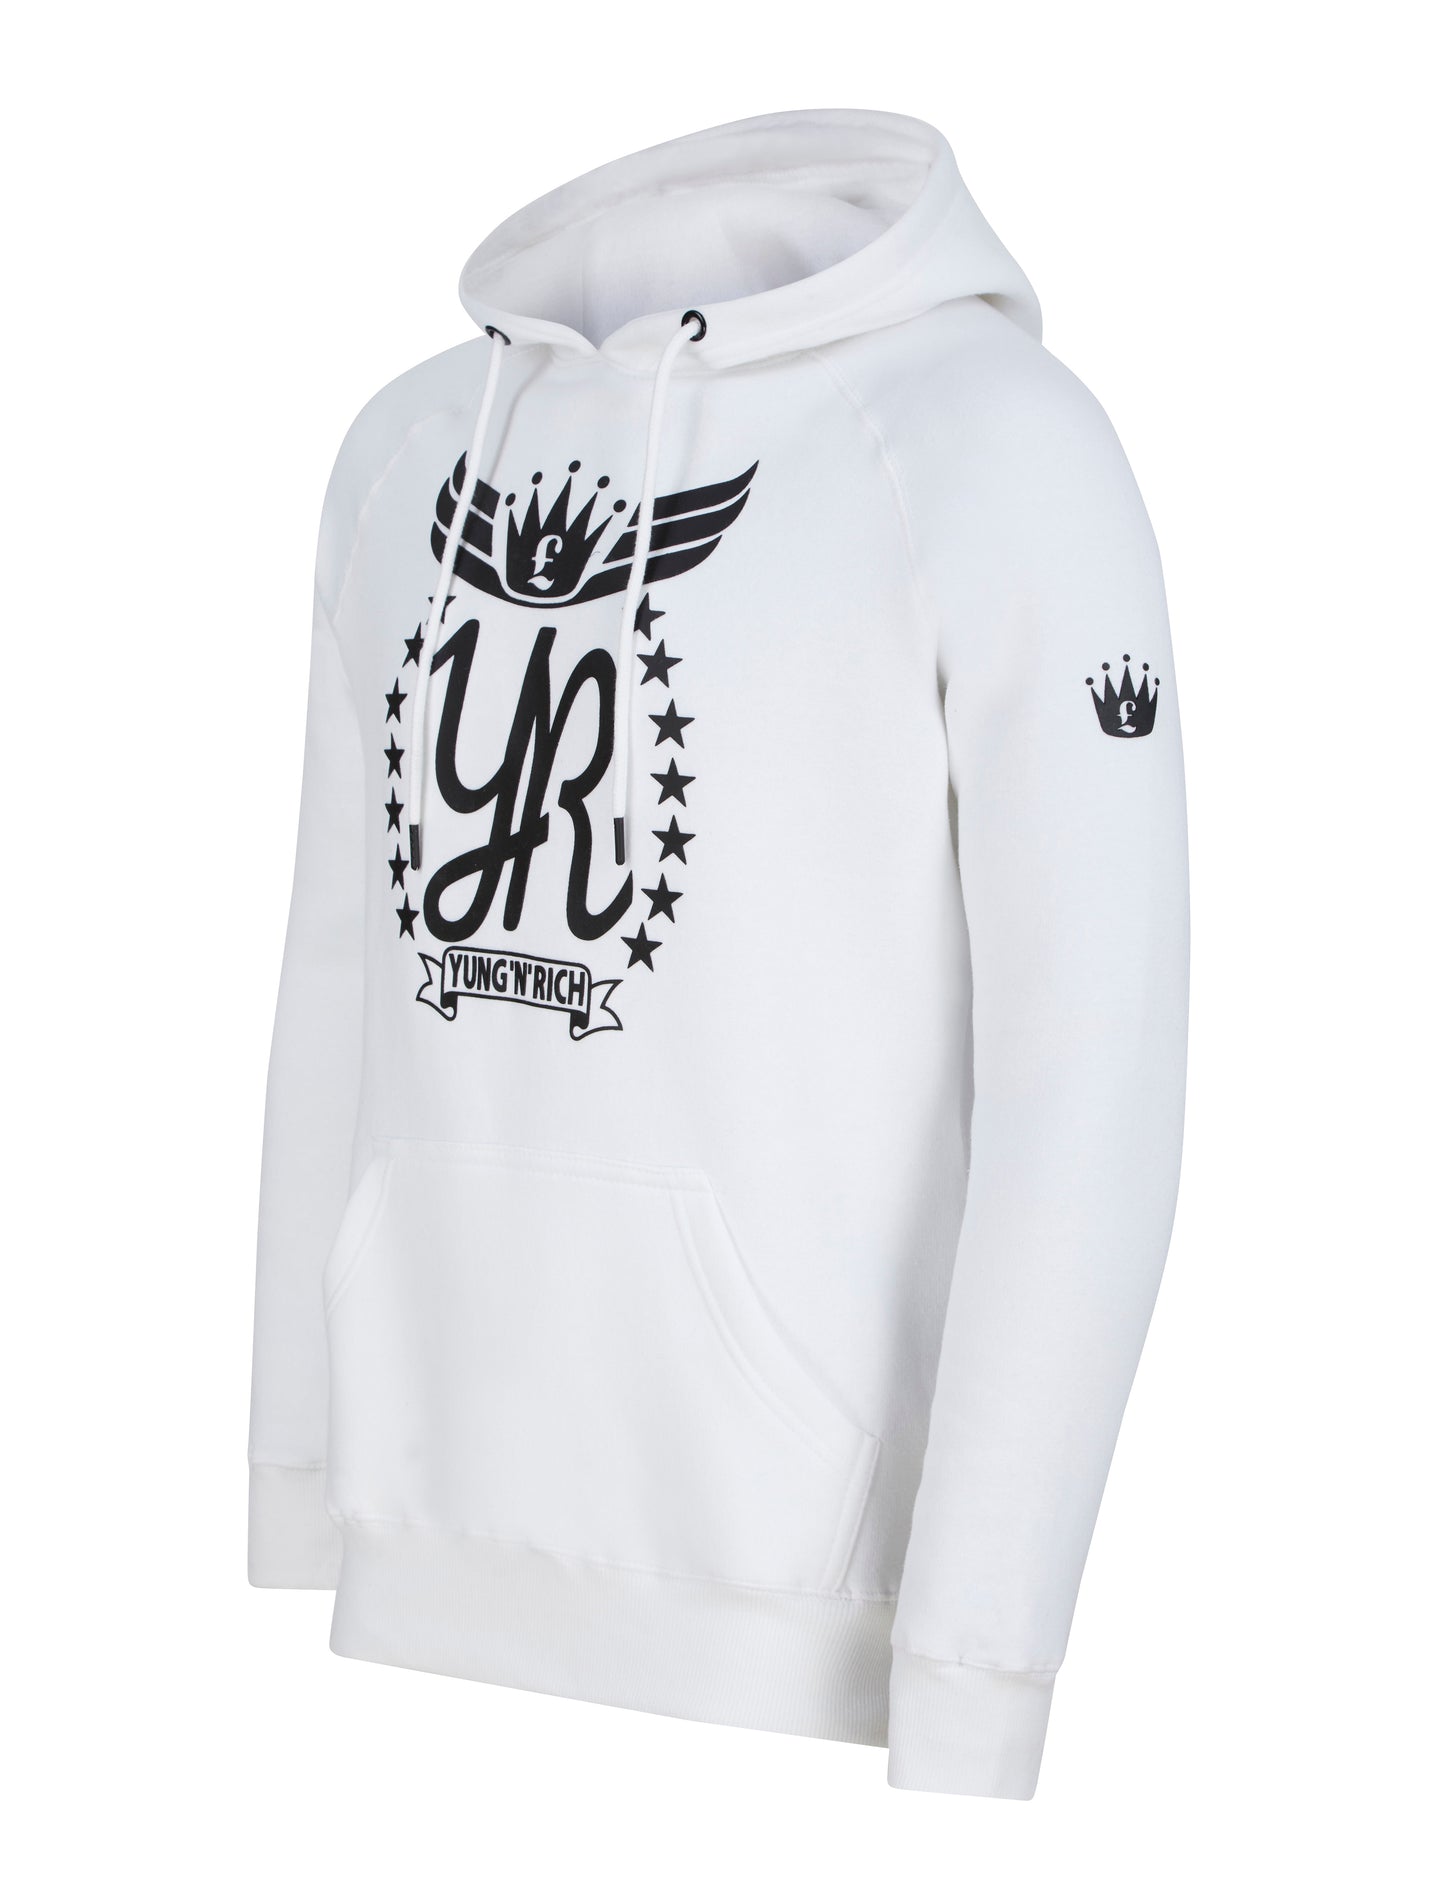 YUNG'N'RICH Hoodie White side view with crown on sleeve